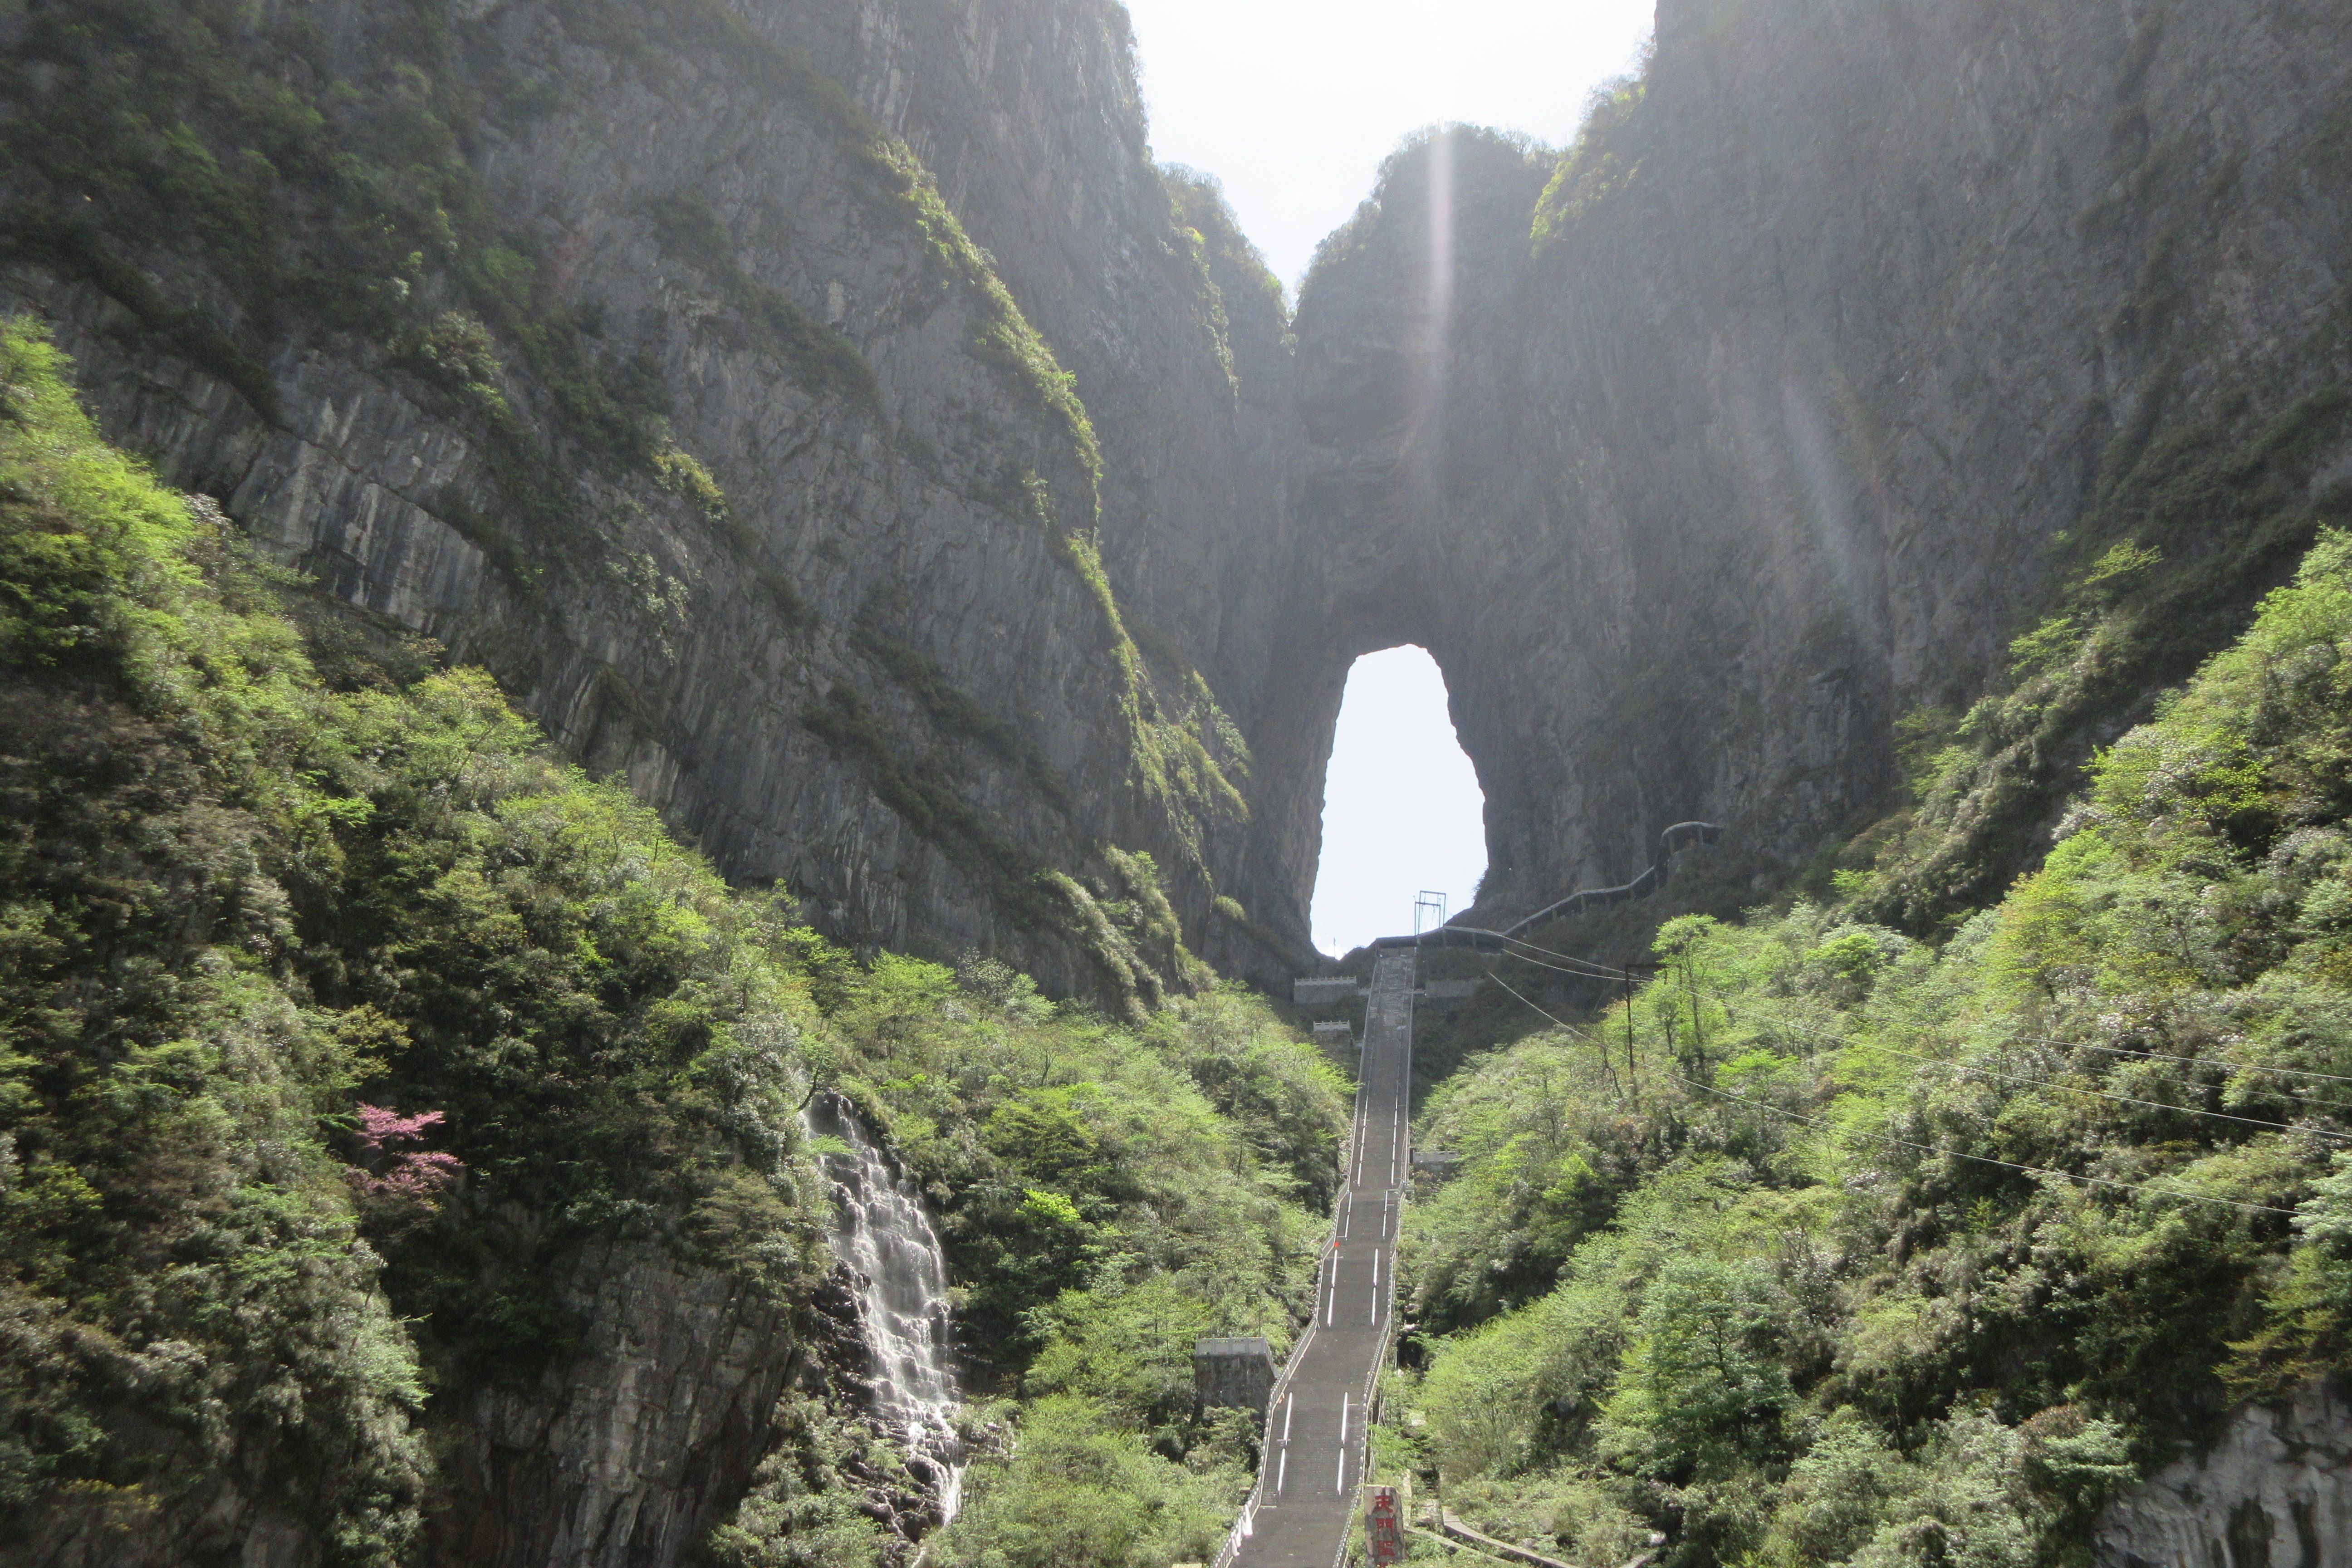 HEAVEN'S GATE. Once you reach the 1st level of escalators that go up the mountain, you get to see 'Heaven's Gate'. 